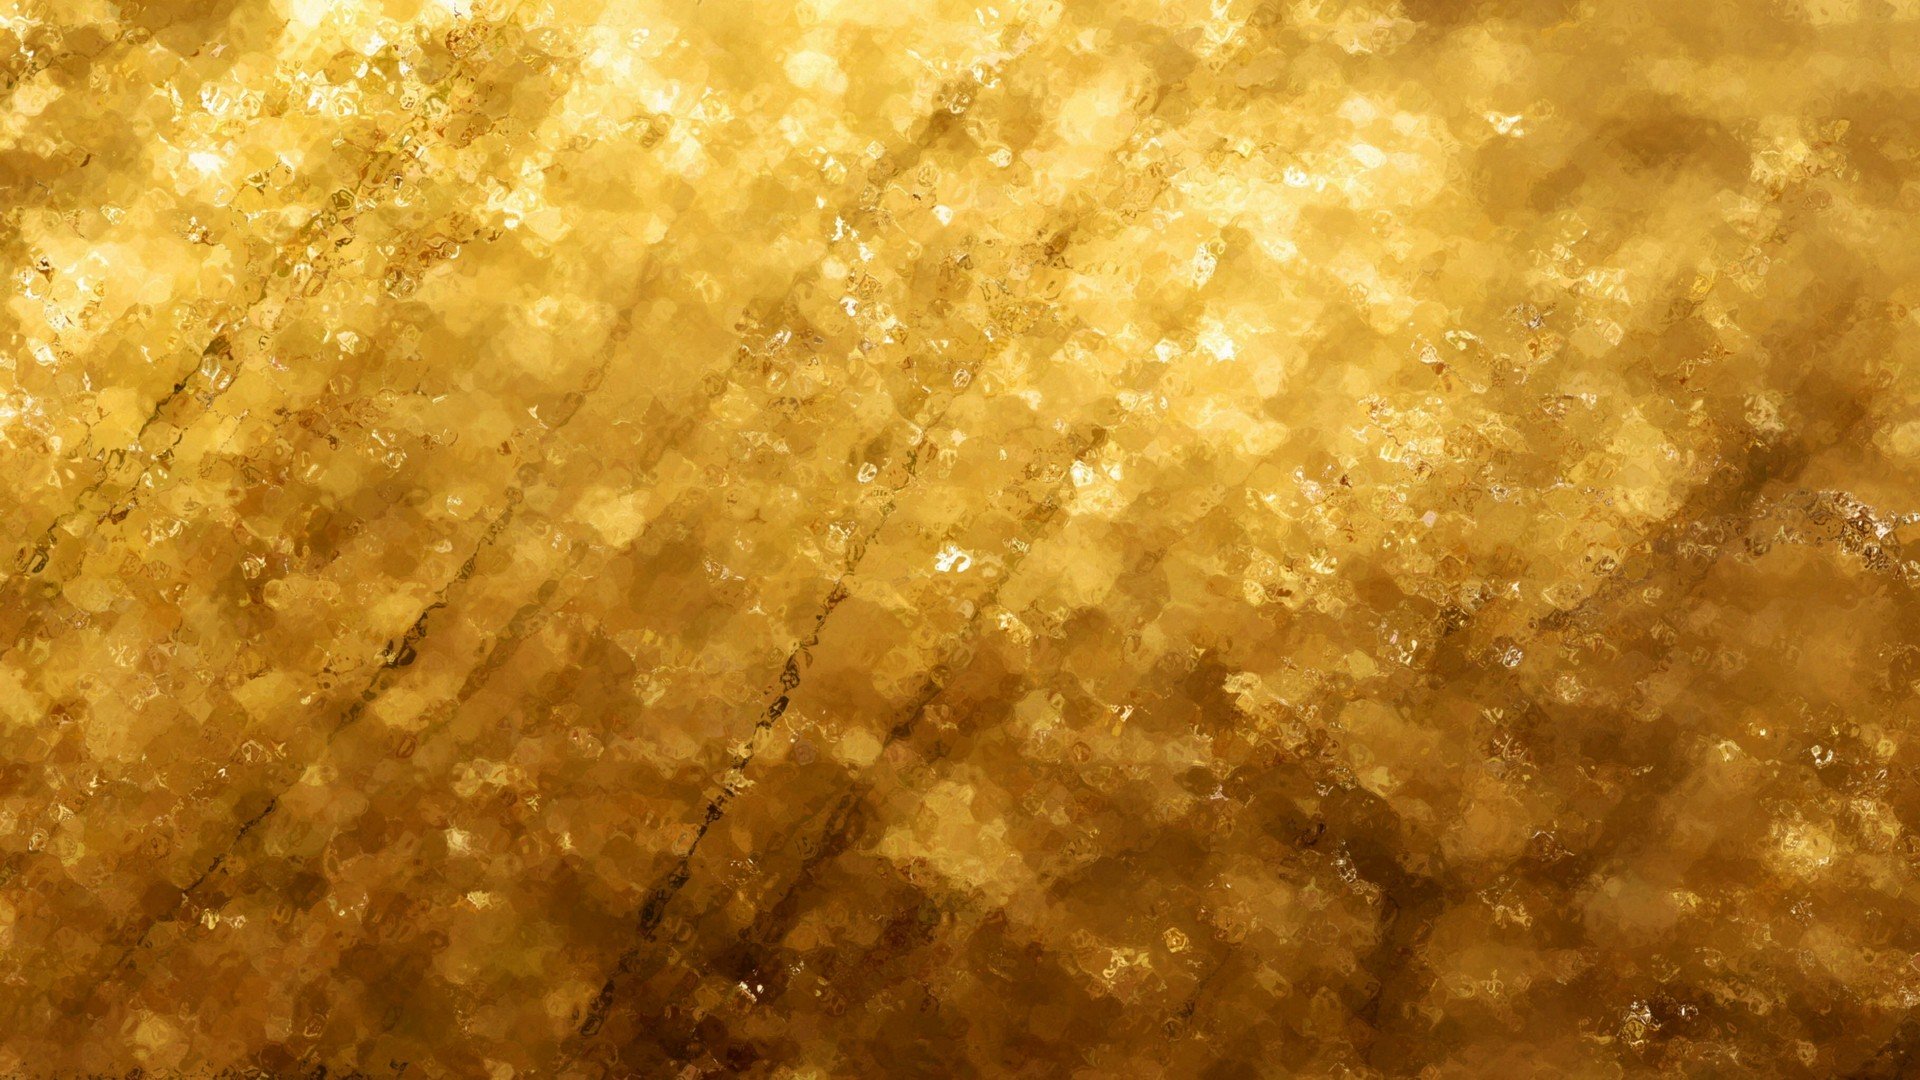 Comments to 40 HD Gold Wallpaper Backgrounds For Free Desktop